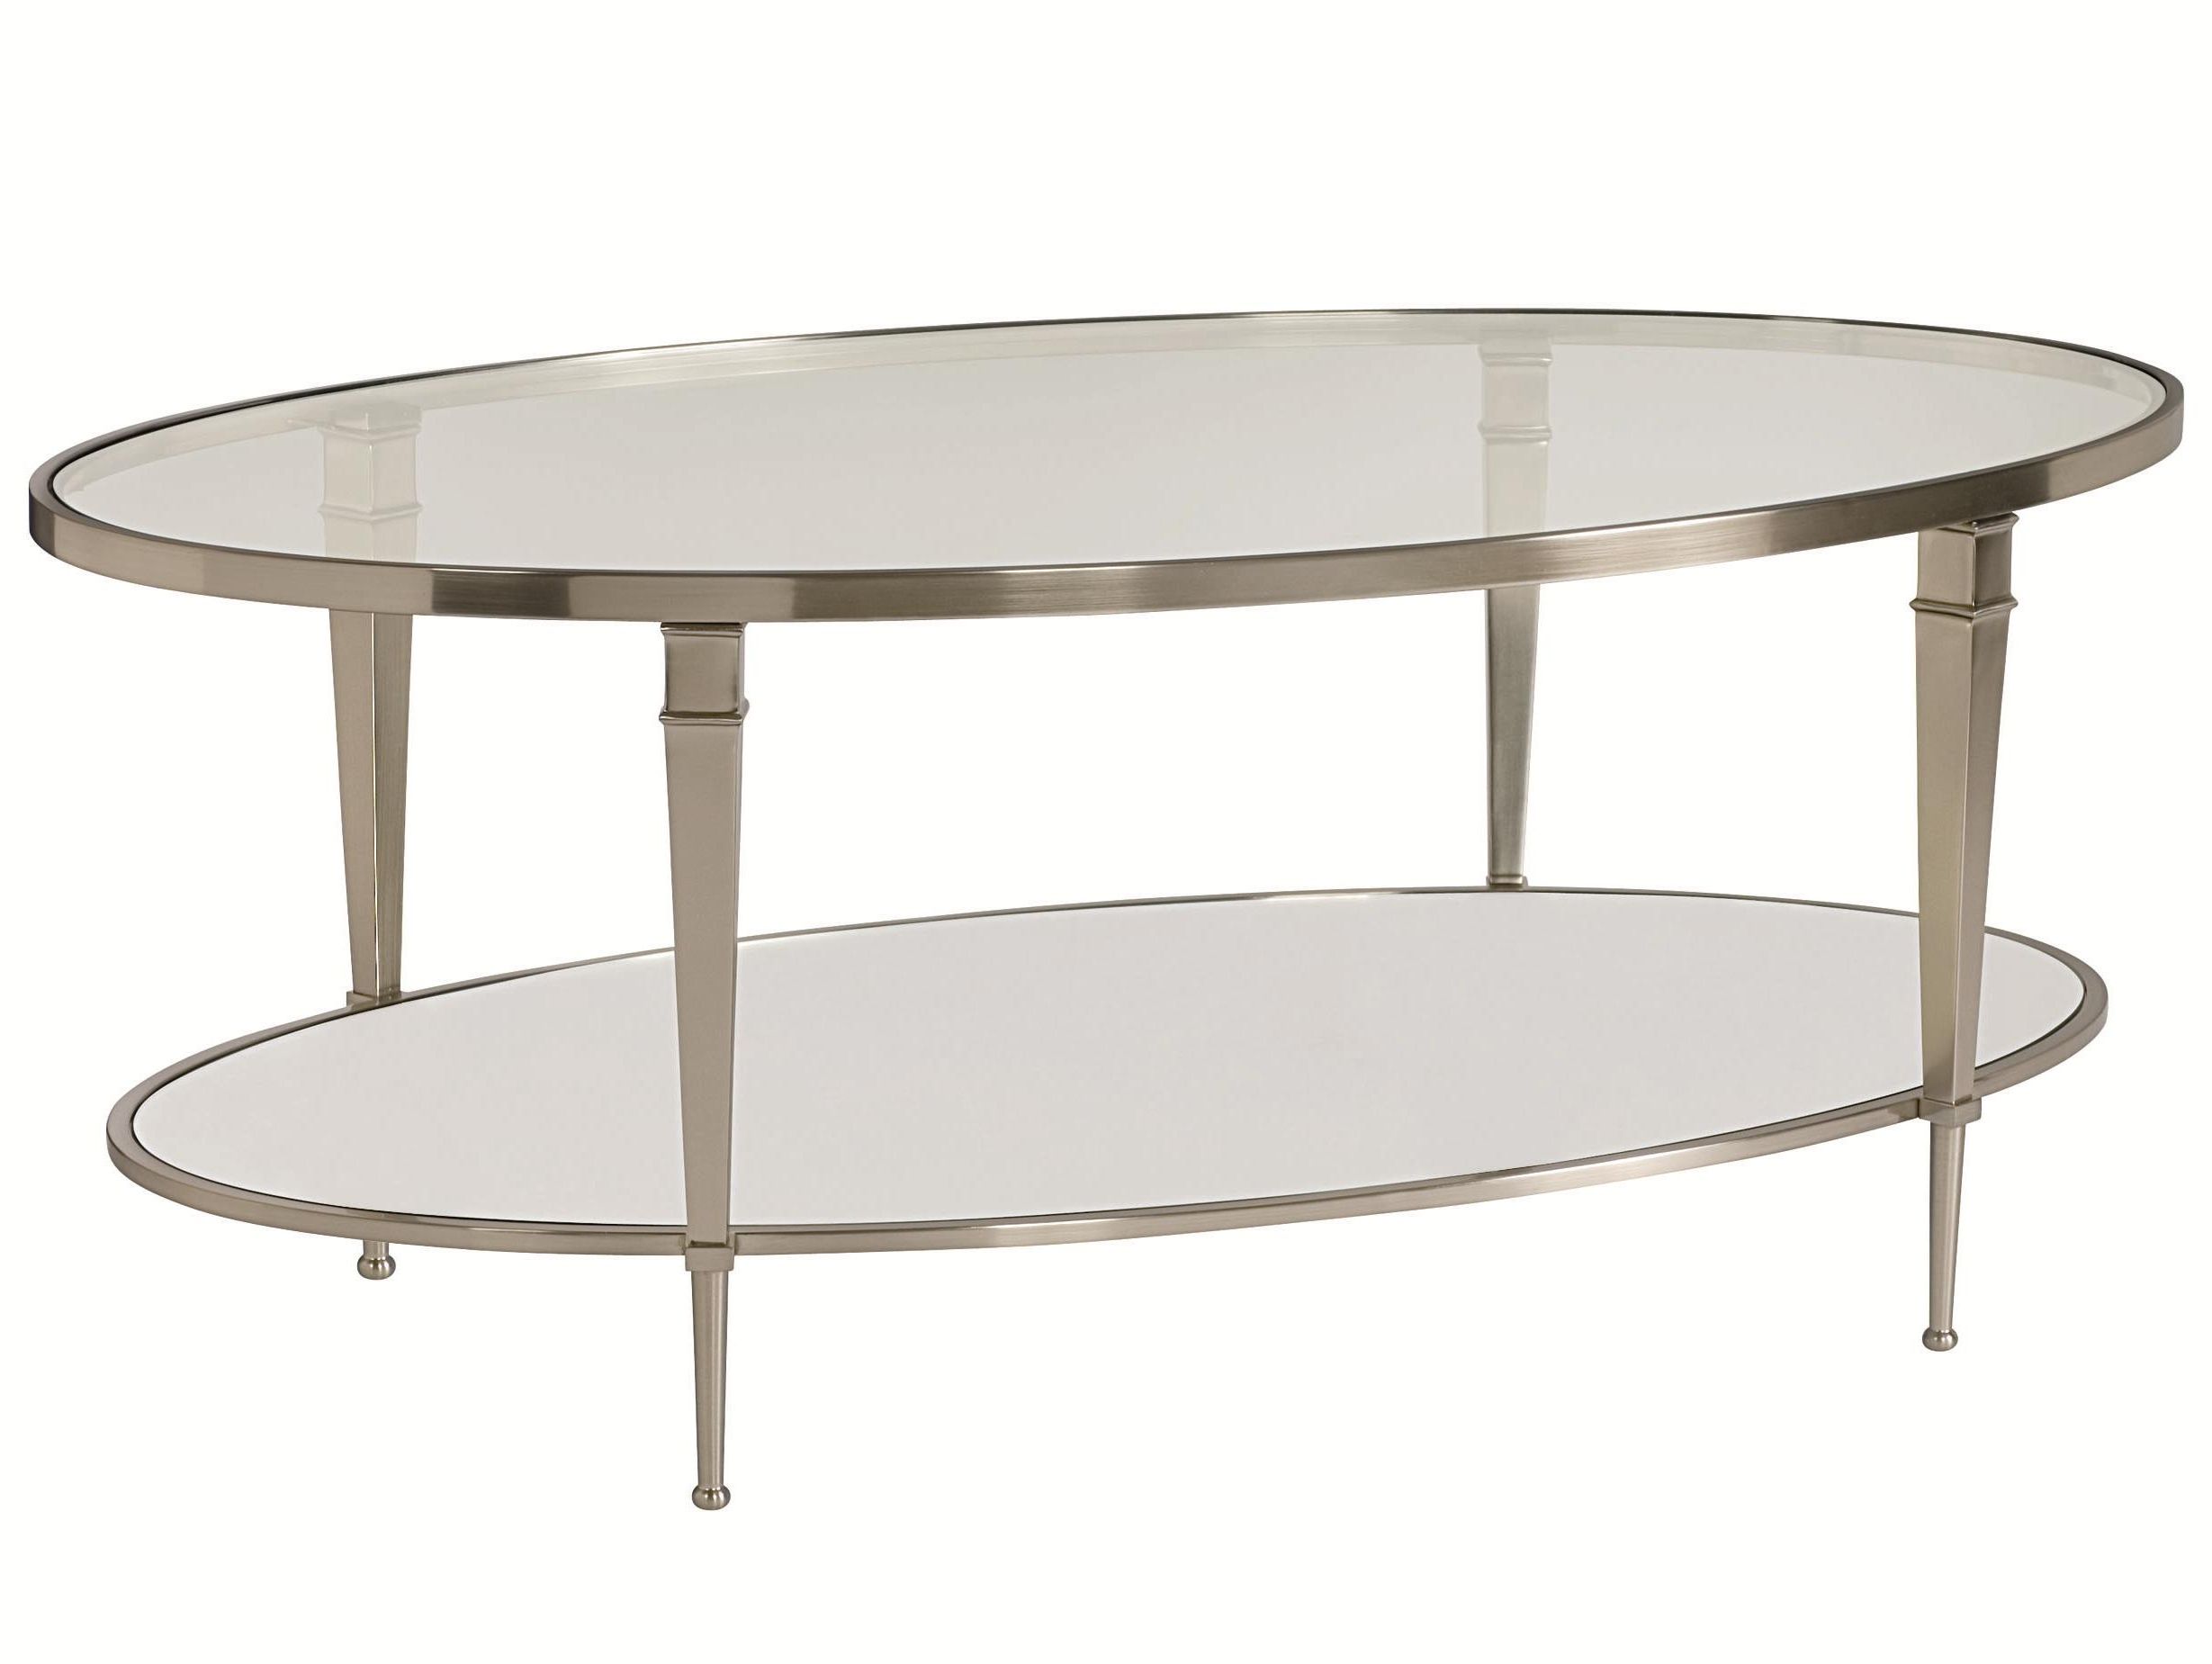 Well Liked Mirrored And Silver Cocktail Tables Within Oval Satin Nickel Antique Mirror Finish Cocktail Table (View 13 of 20)